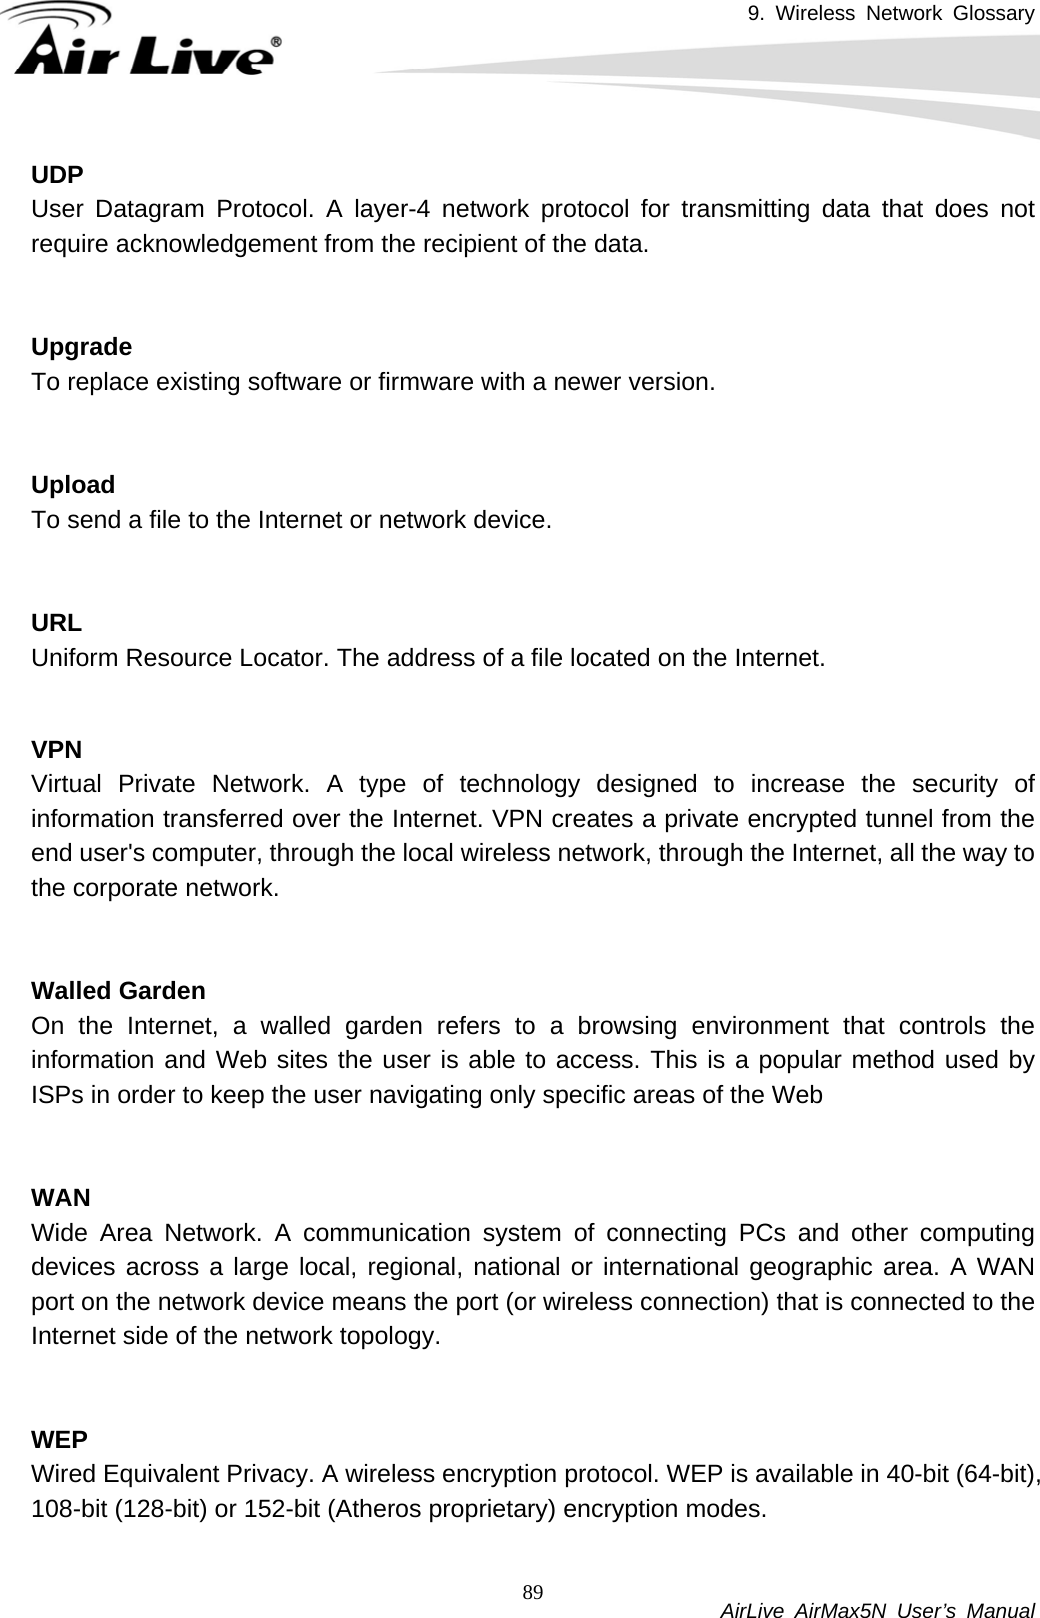 9. Wireless Network Glossary           AirLive AirMax5N User’s Manual 89UDP User Datagram Protocol. A layer-4 network protocol for transmitting data that does not require acknowledgement from the recipient of the data.   UpgradeTo replace existing software or firmware with a newer version.   UploadTo send a file to the Internet or network device.   URLUniform Resource Locator. The address of a file located on the Internet.   VPN Virtual Private Network. A type of technology designed to increase the security of information transferred over the Internet. VPN creates a private encrypted tunnel from the end user&apos;s computer, through the local wireless network, through the Internet, all the way to the corporate network.   Walled GardenOn the Internet, a walled garden refers to a browsing environment that controls the information and Web sites the user is able to access. This is a popular method used by ISPs in order to keep the user navigating only specific areas of the Web   WANWide Area Network. A communication system of connecting PCs and other computing devices across a large local, regional, national or international geographic area. A WAN port on the network device means the port (or wireless connection) that is connected to the Internet side of the network topology.   WEP Wired Equivalent Privacy. A wireless encryption protocol. WEP is available in 40-bit (64-bit), 108-bit (128-bit) or 152-bit (Atheros proprietary) encryption modes.    